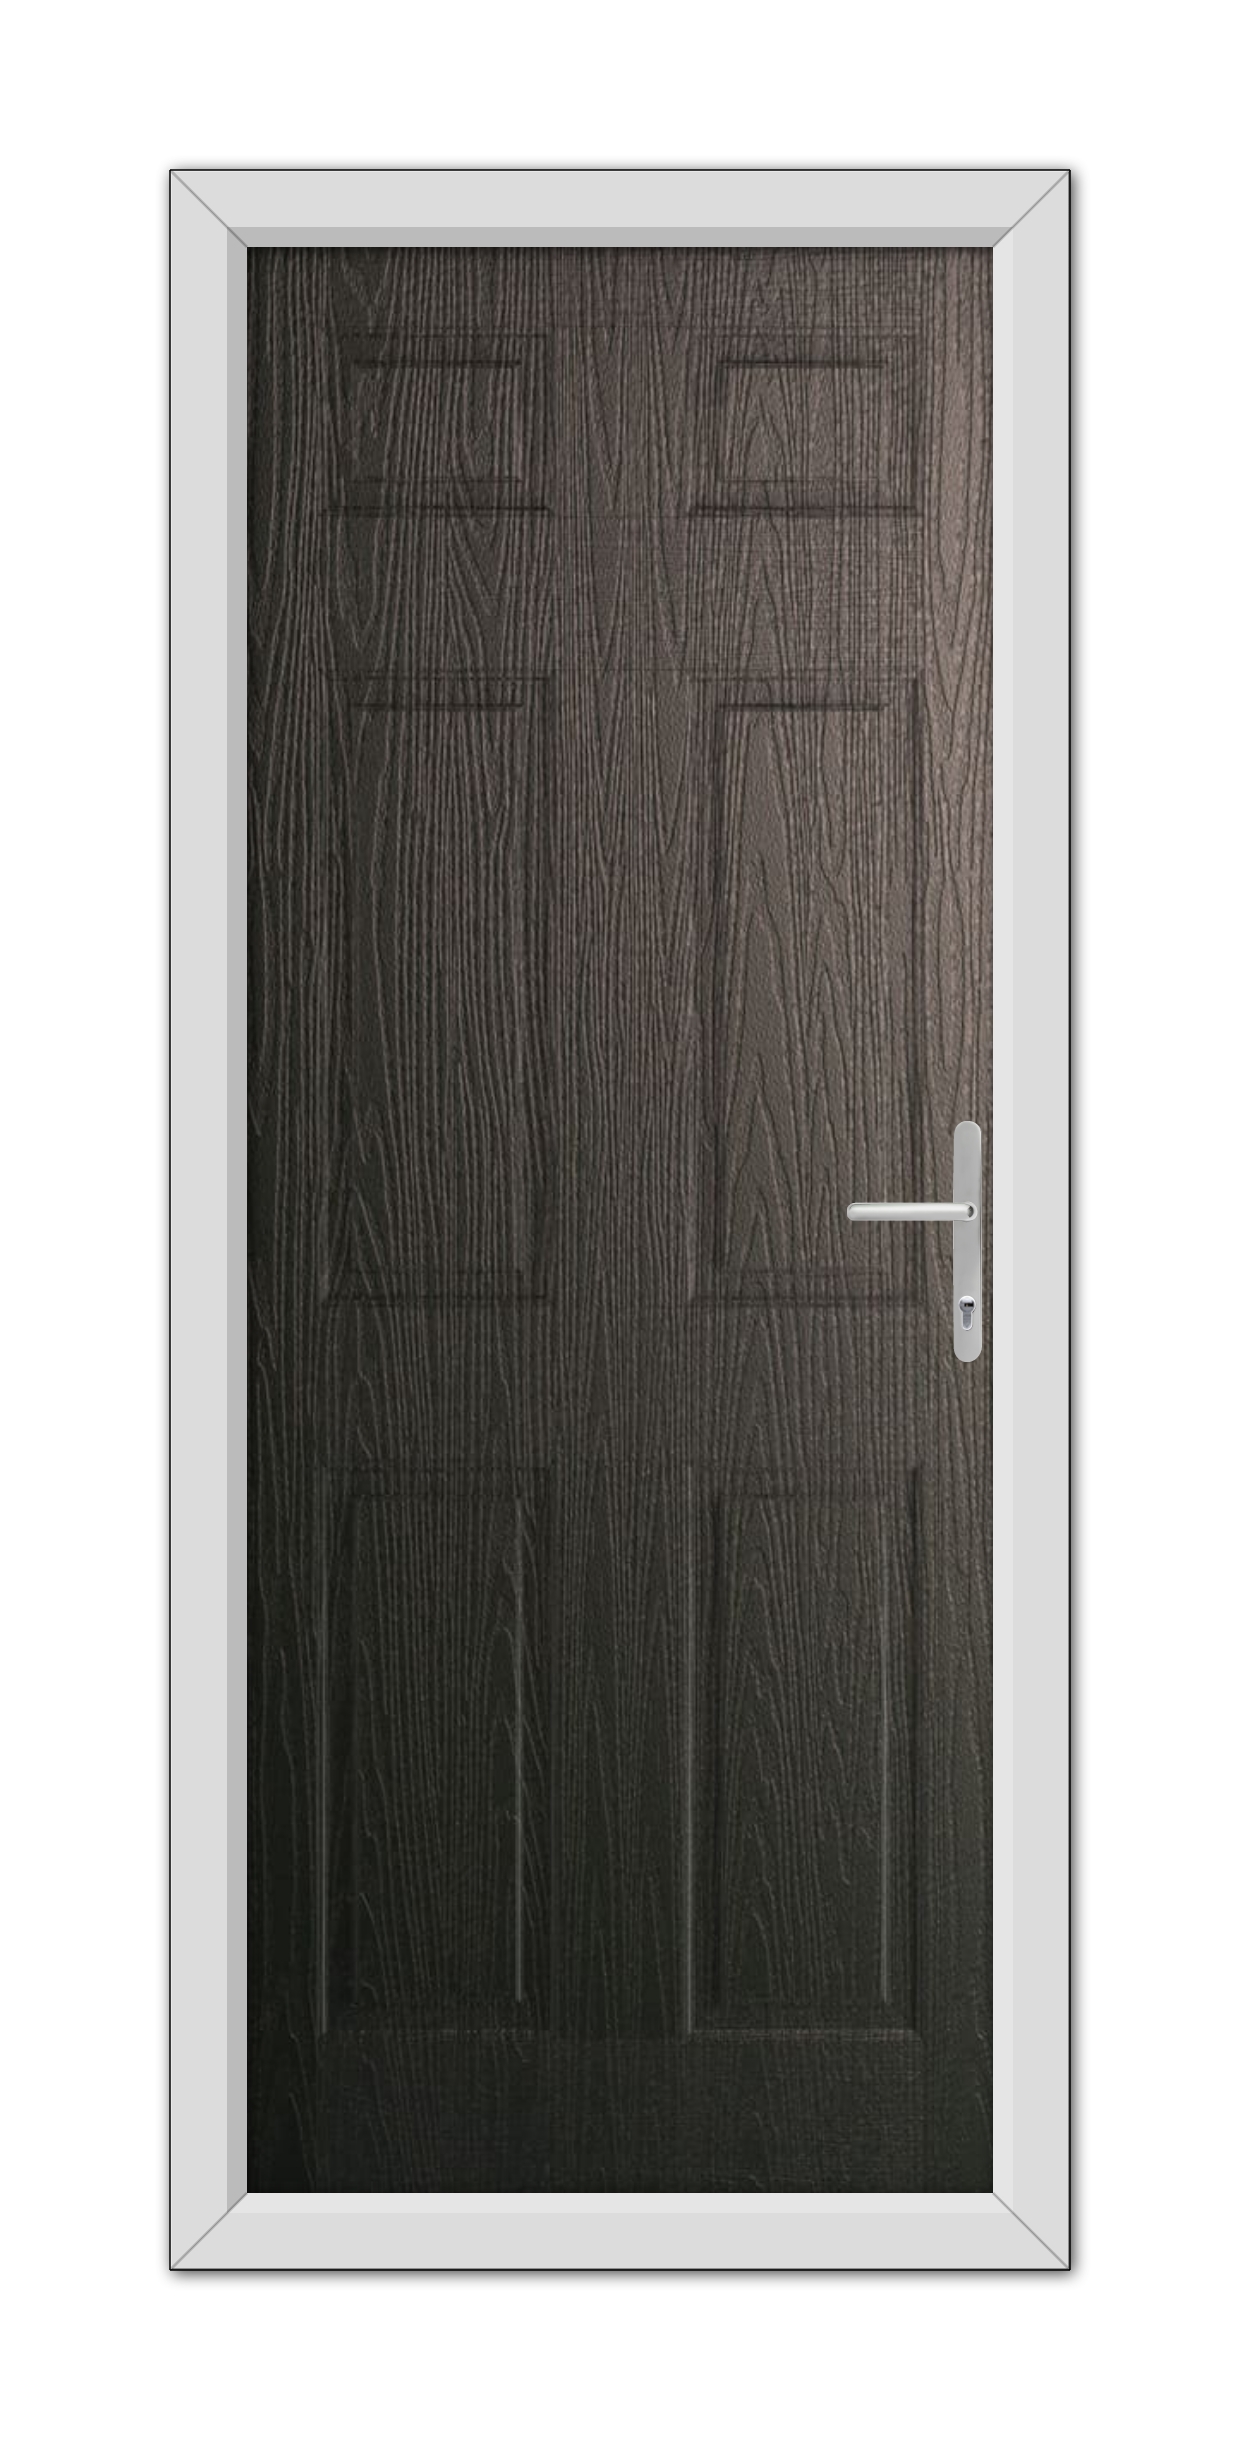 A modern Schwarzbraun Middleton Solid Composite Door 48mm Timber Core with a silver handle, framed by a white doorframe, set against a plain background.